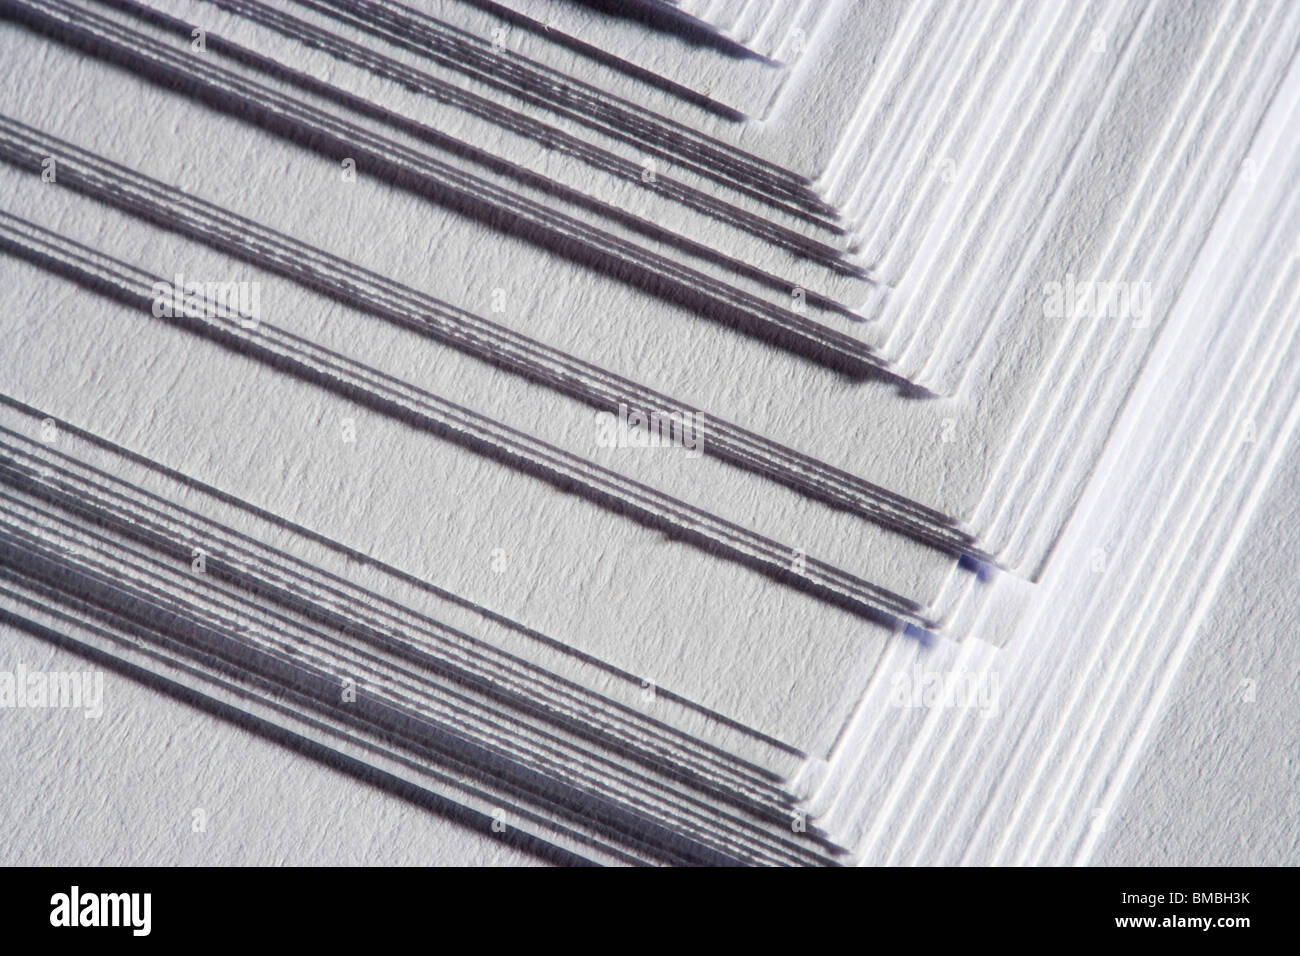 Stack of paper, close up Stock Photo